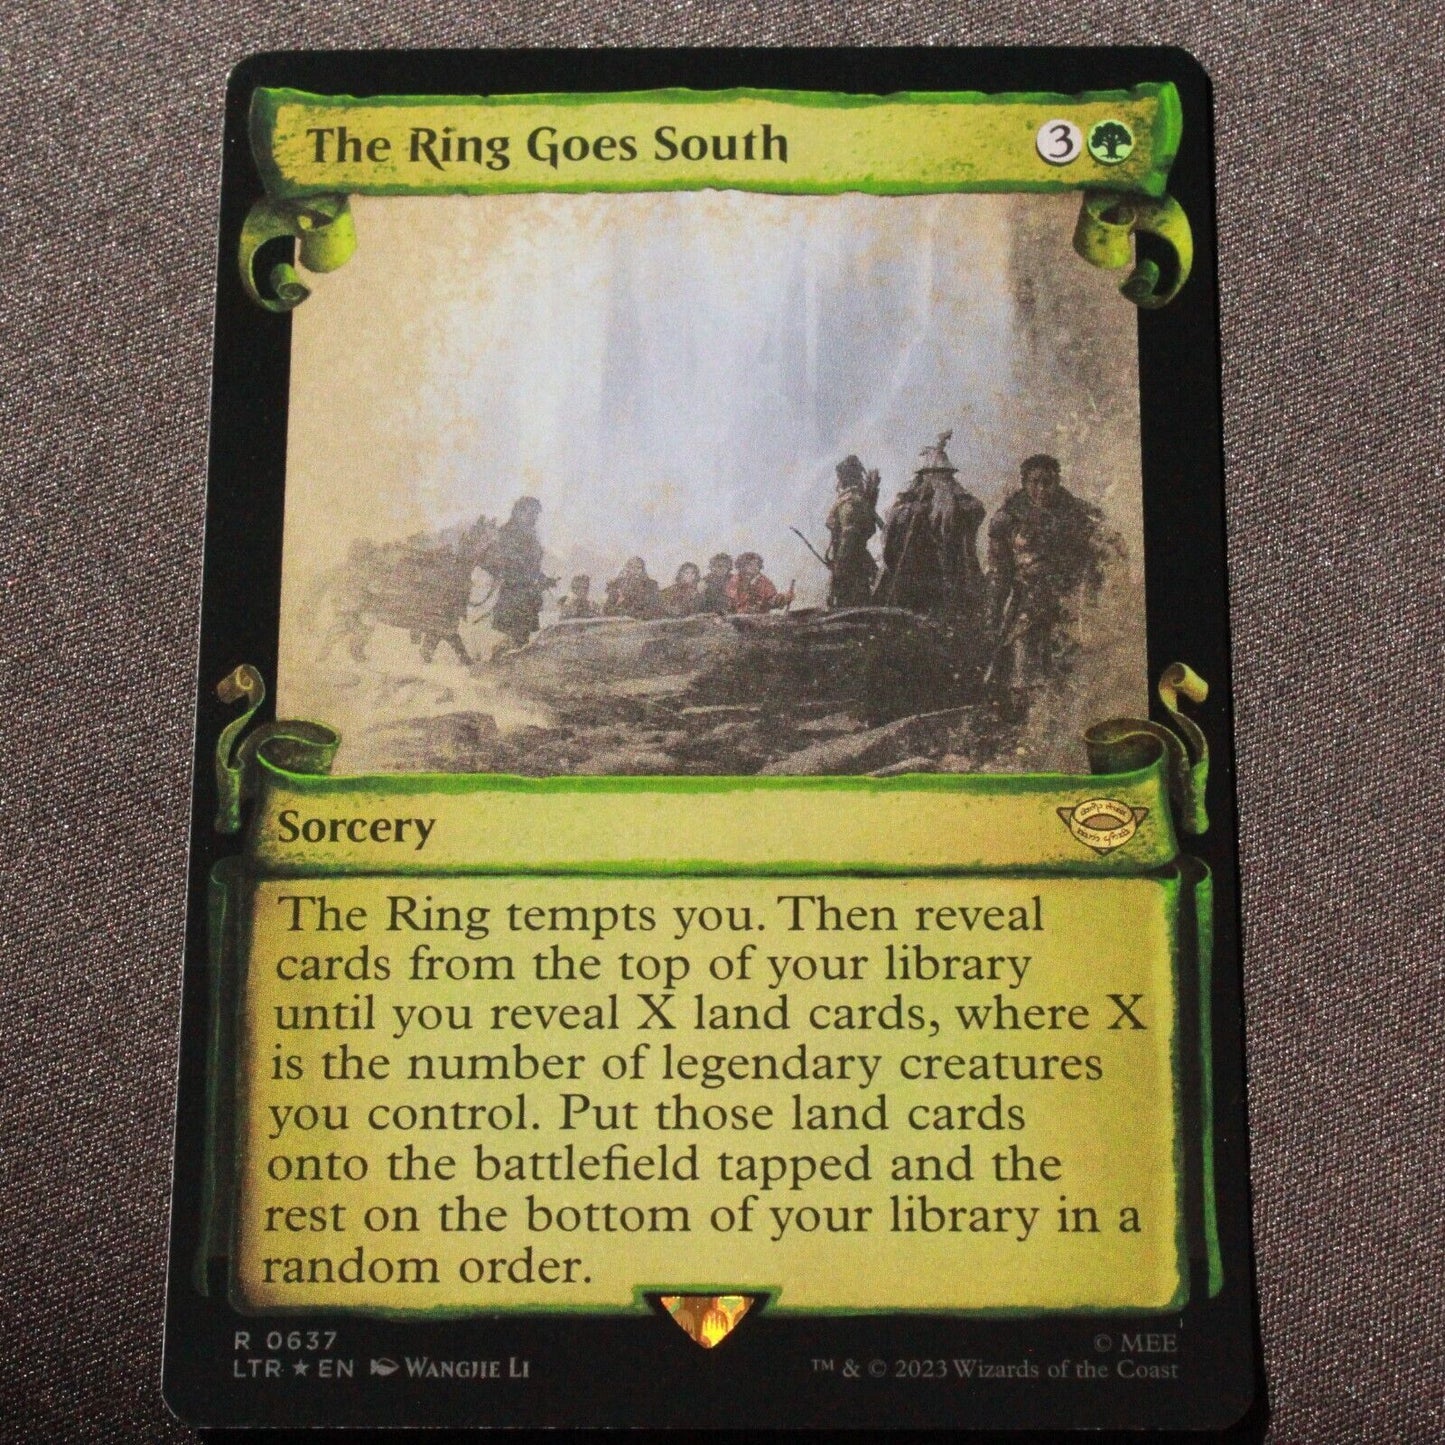 MTG Lord of the Rings LTR Rare FOIL The Ring Goes South Showcase Scrolls 637 NM